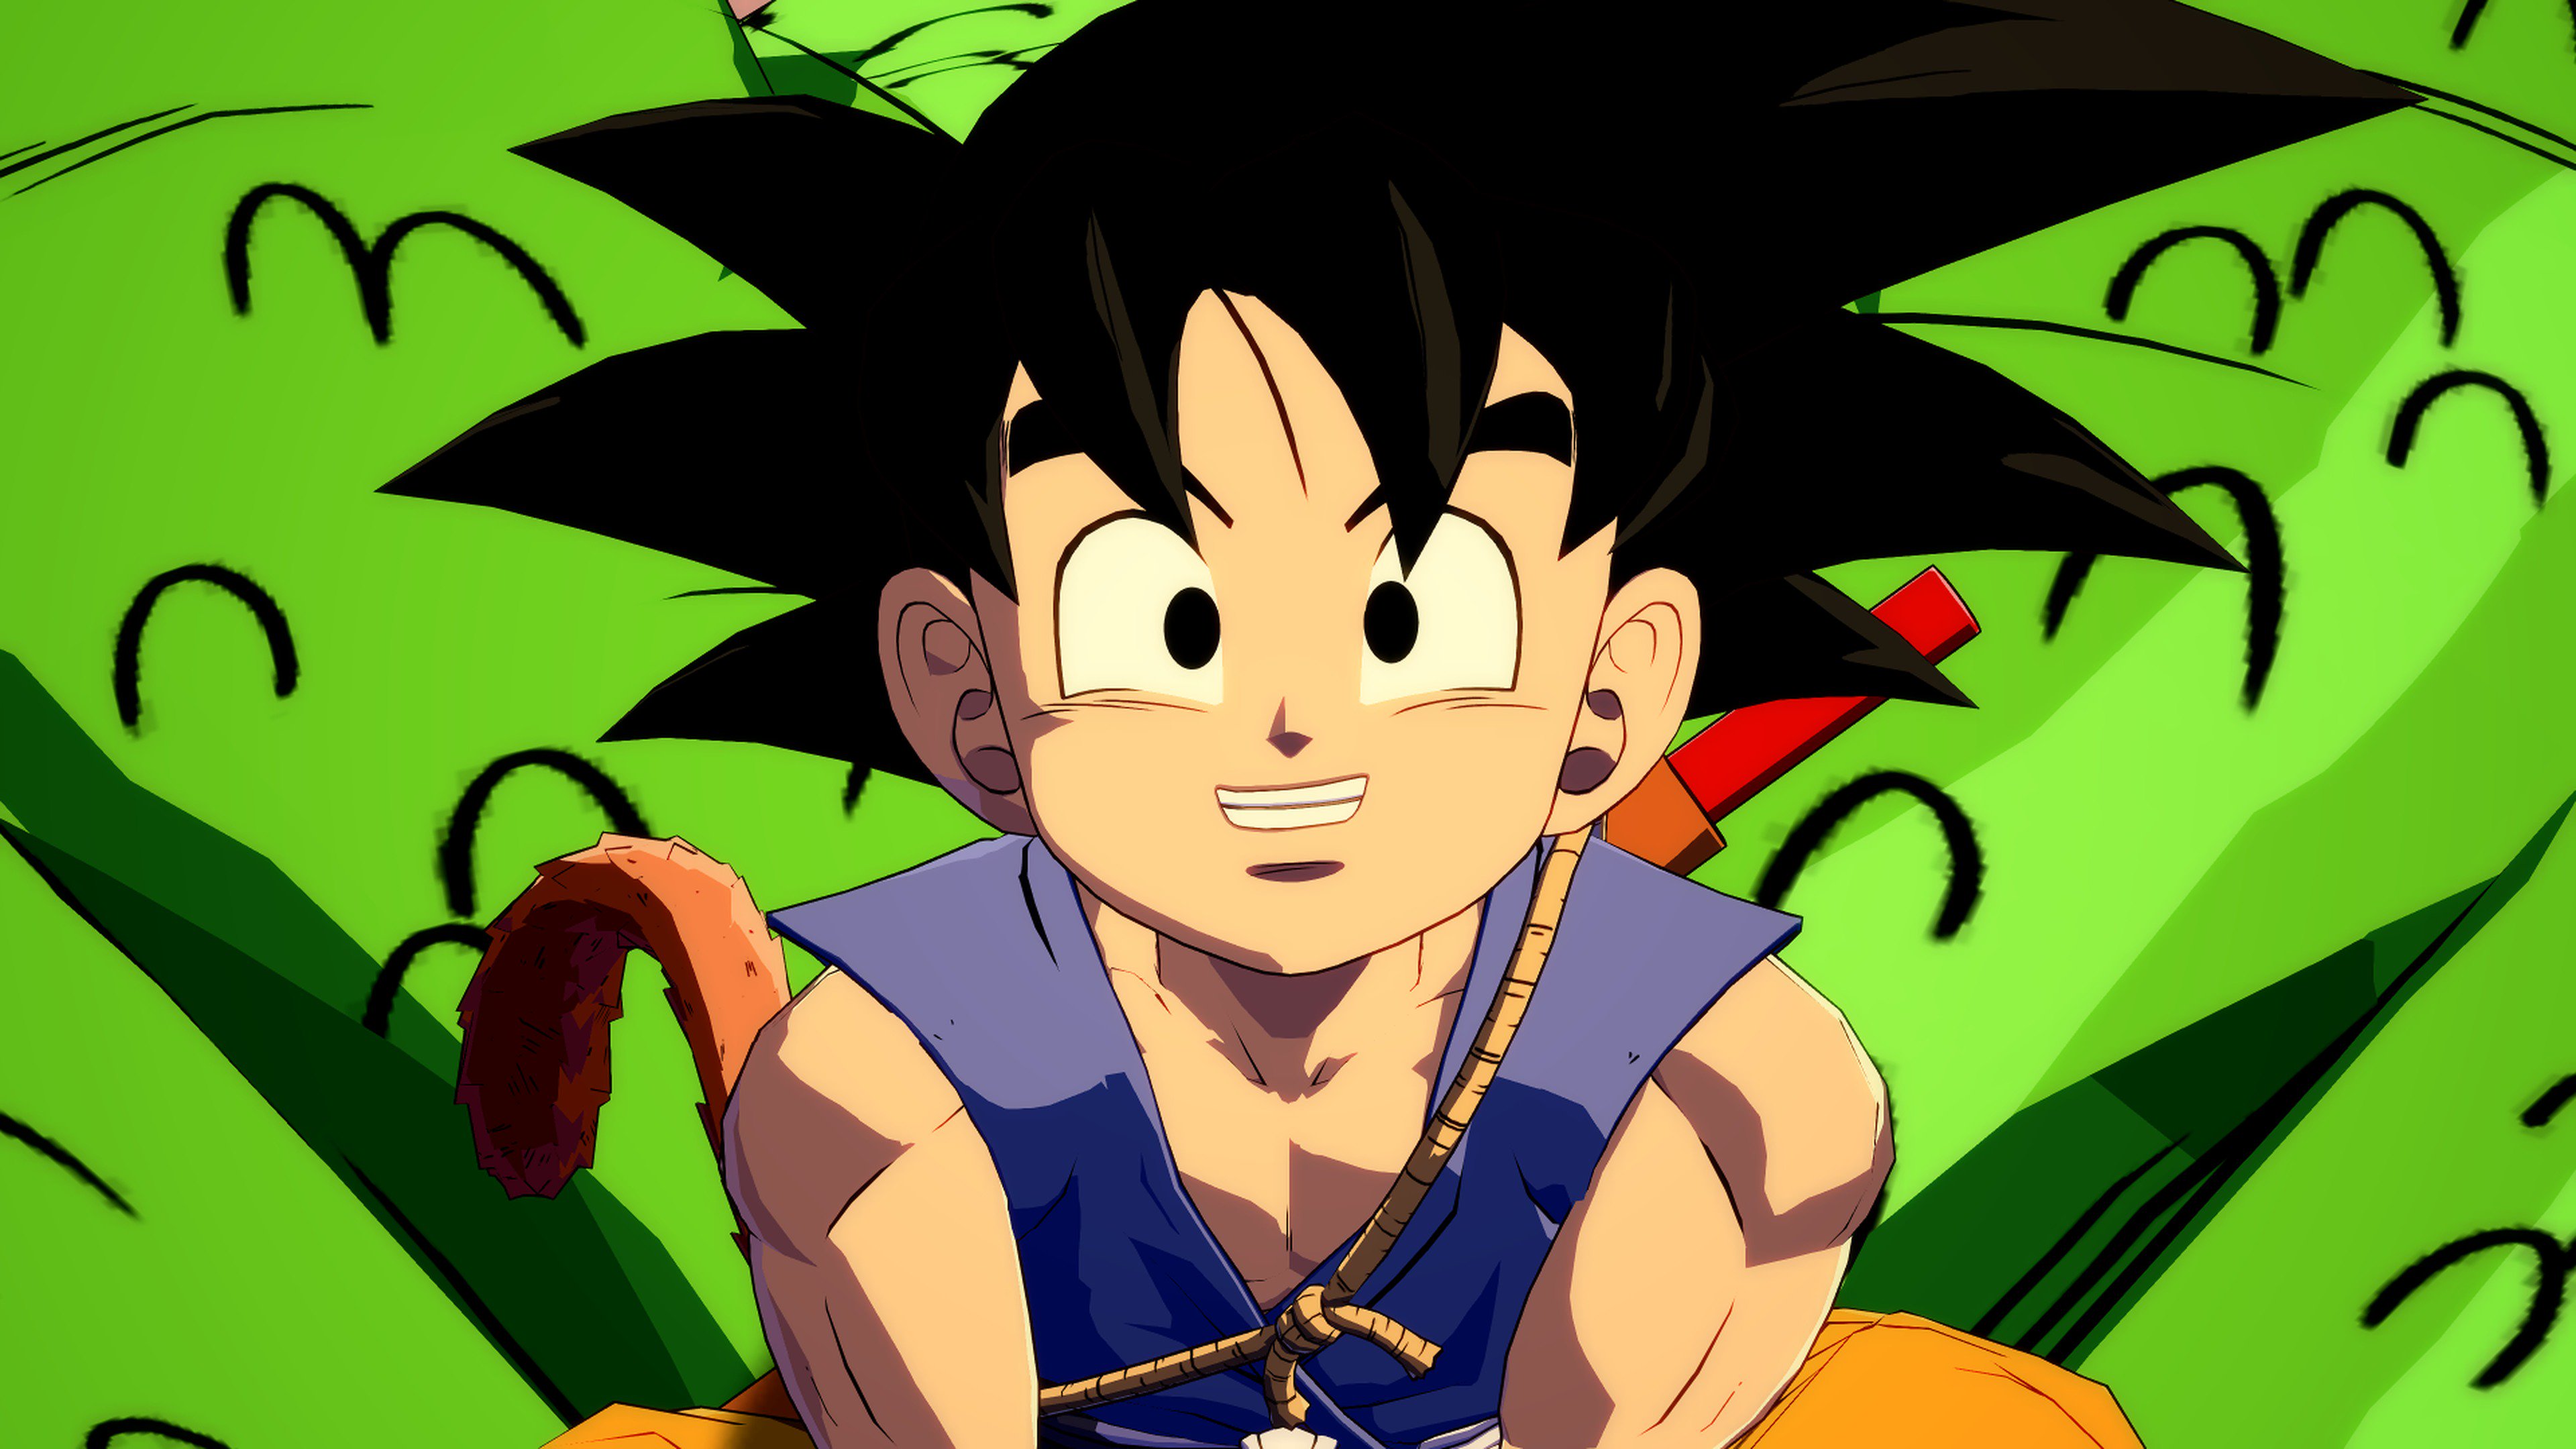 Kid Goku (GT) will be added as a DLC character in Dragon Ball FighterZ some...